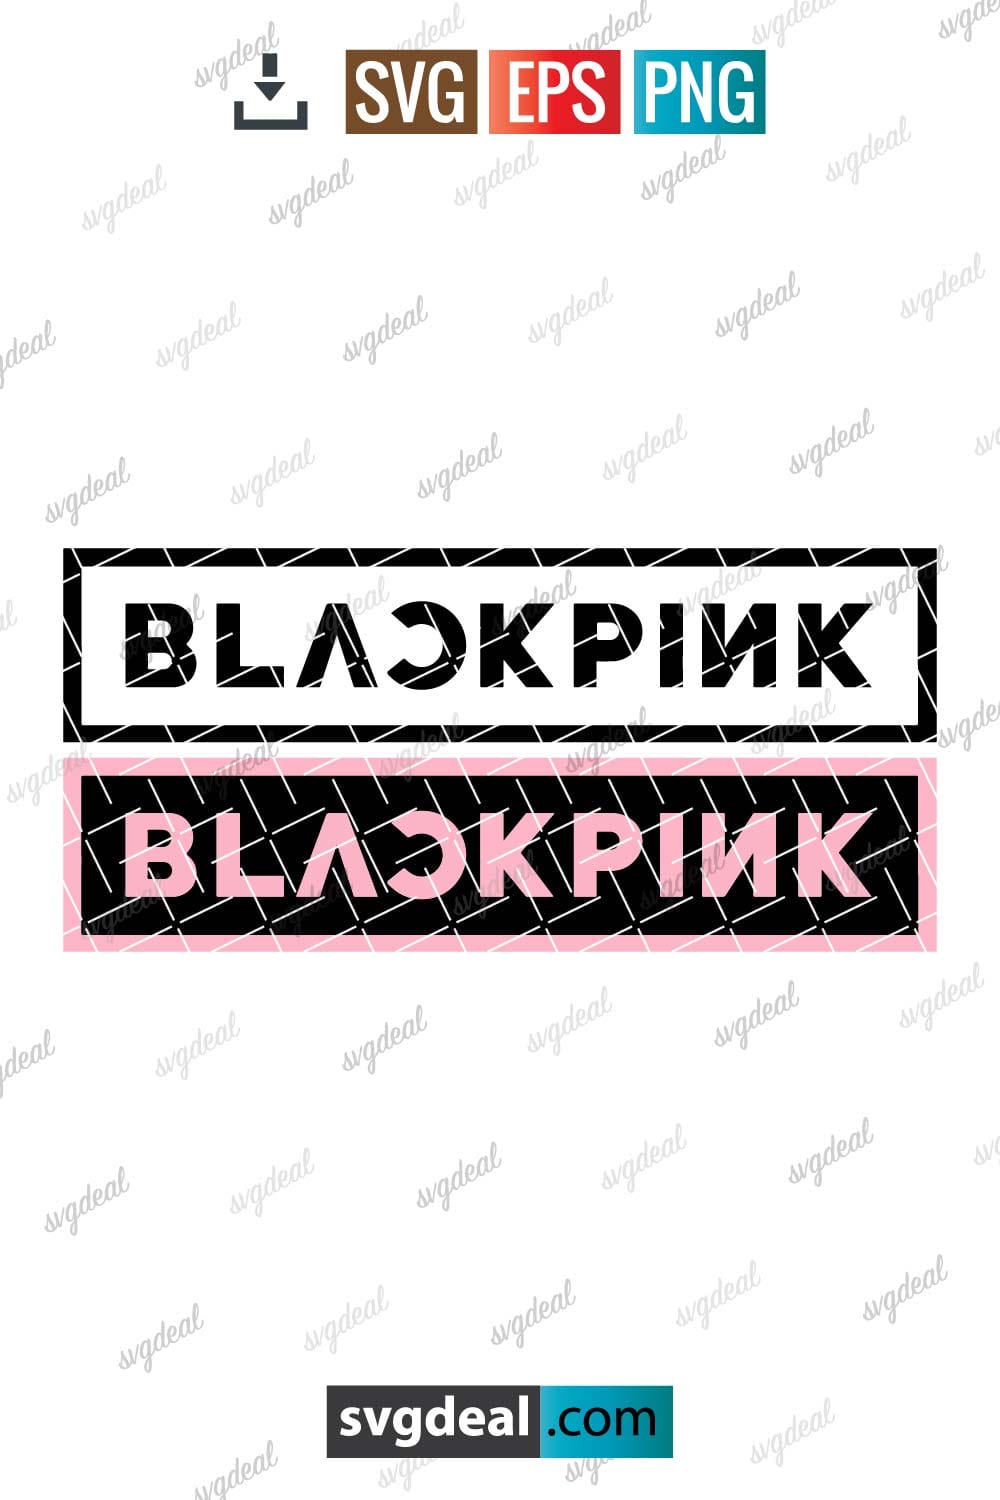 Download Blackpink Logo With Animated Members Wallpaper | Wallpapers.com